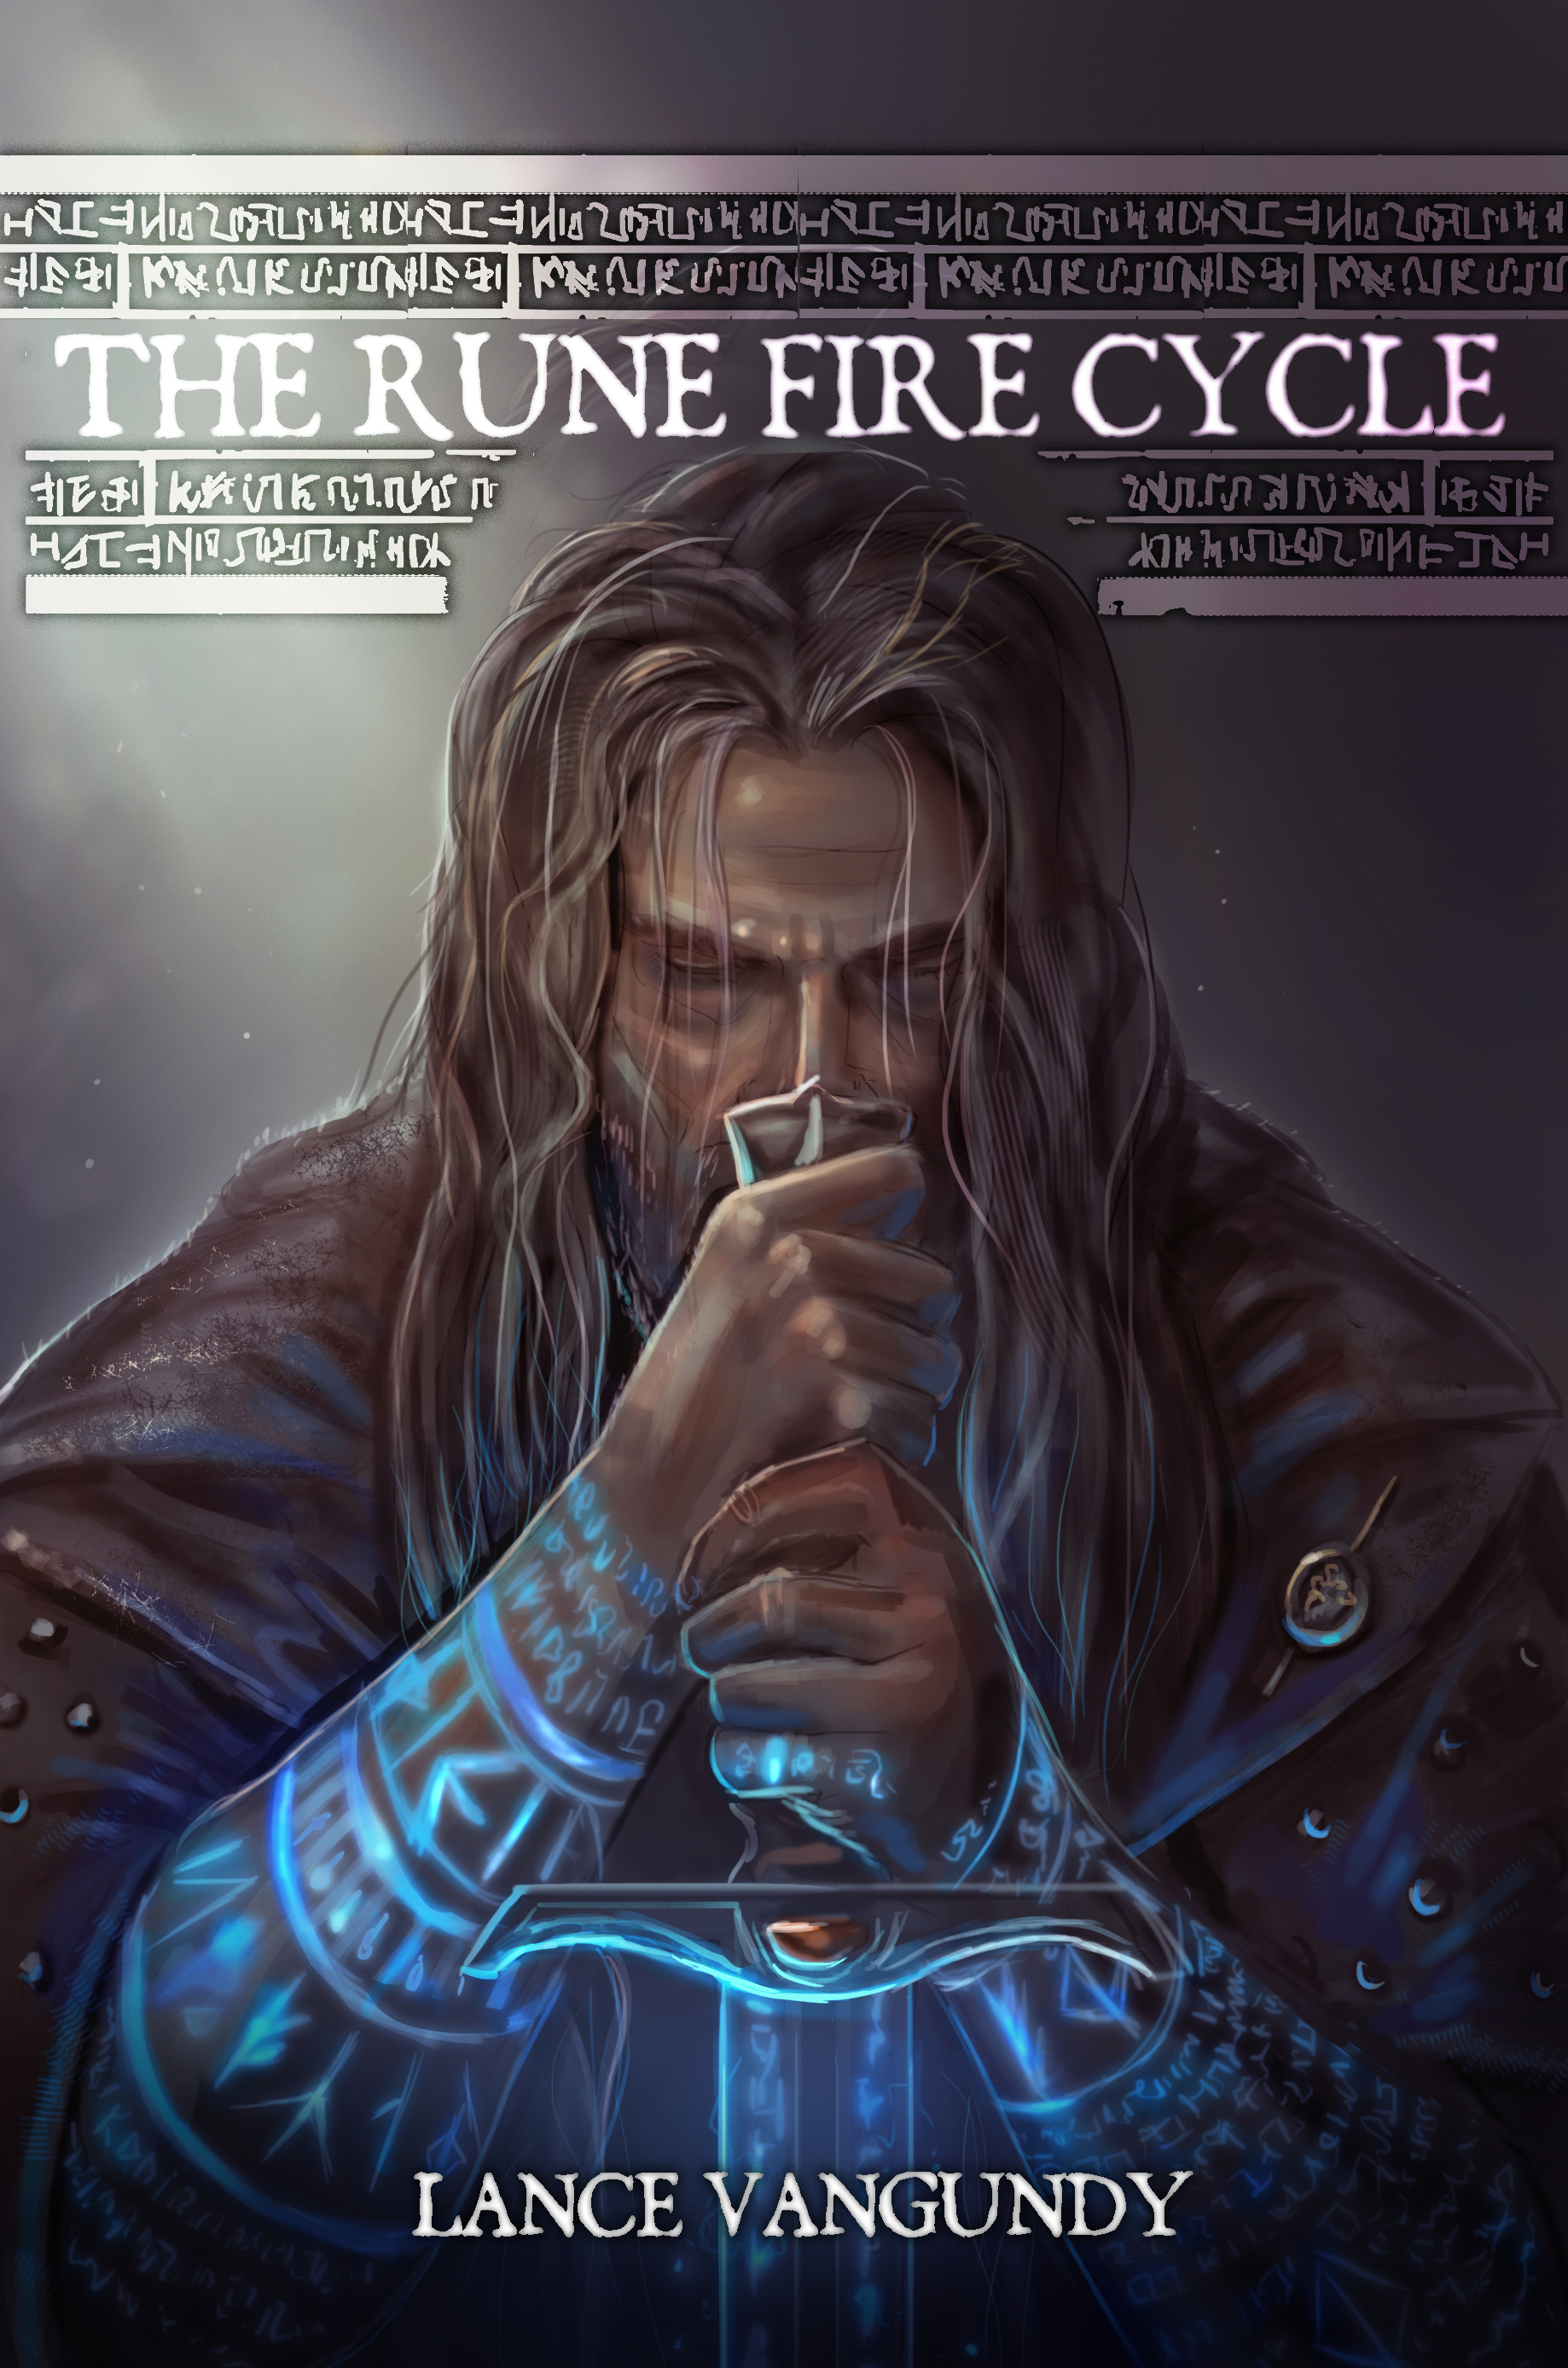 A fantasy book cover with runes and a warrior kneeling over a sword